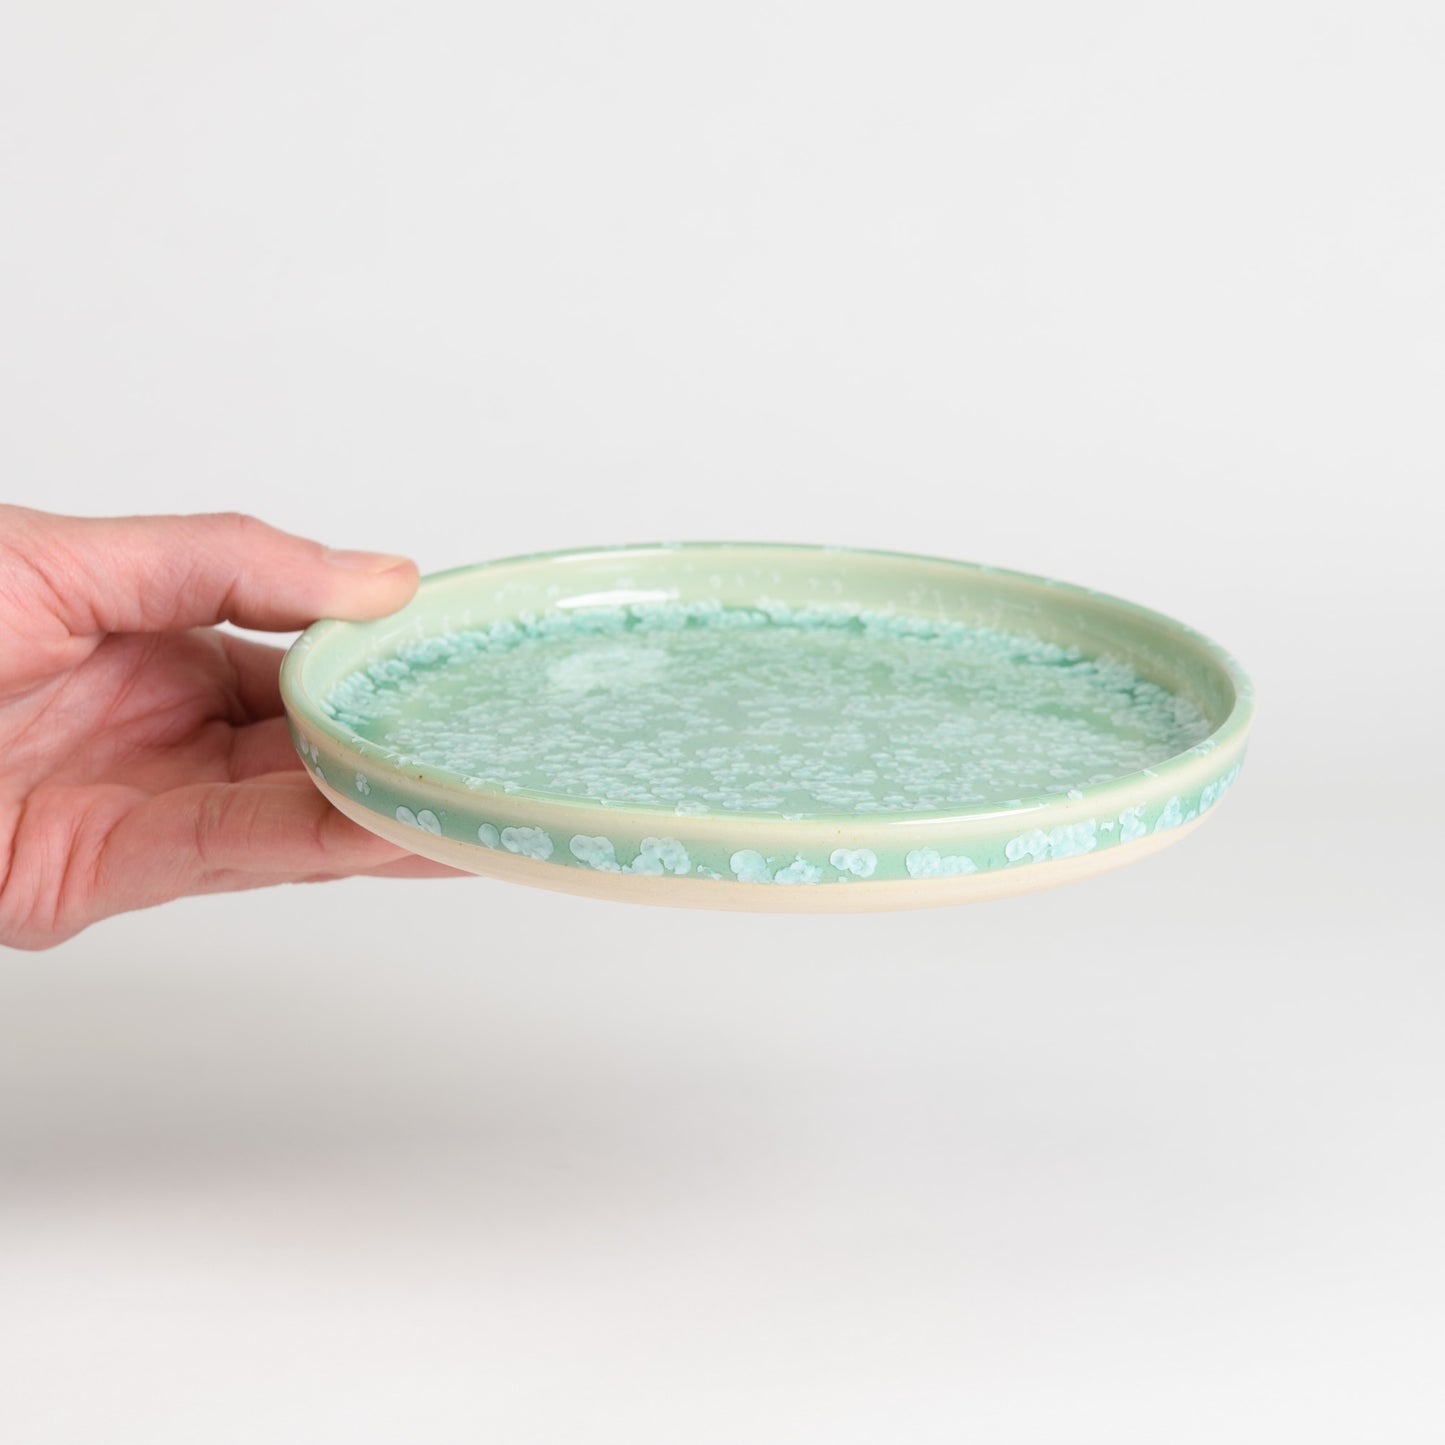 Side Plate - Crystal Green or Teal